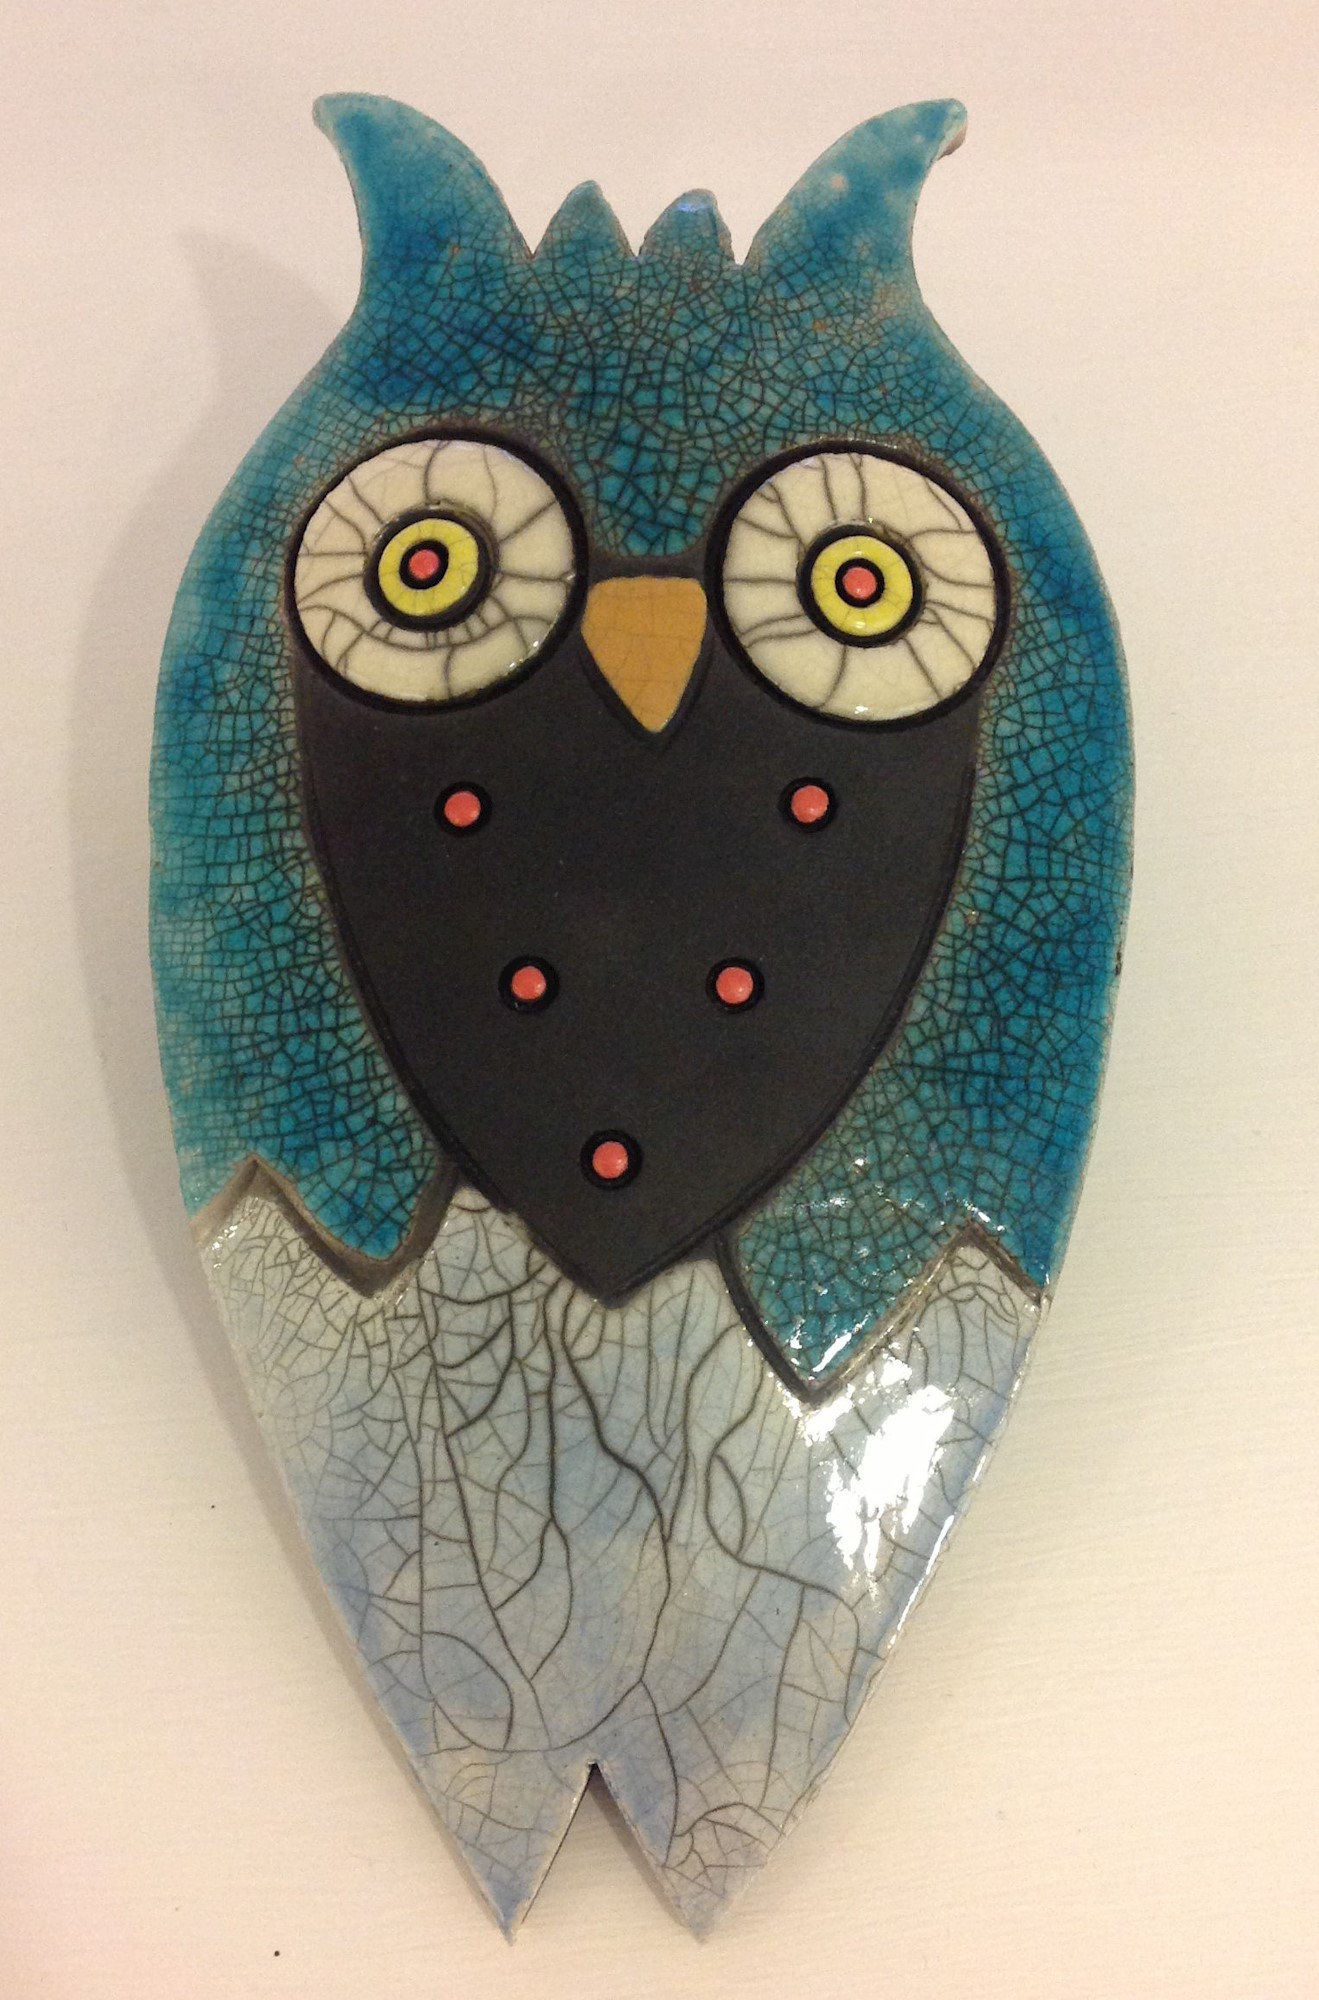 'Owl Large I' by artist Julian Smith